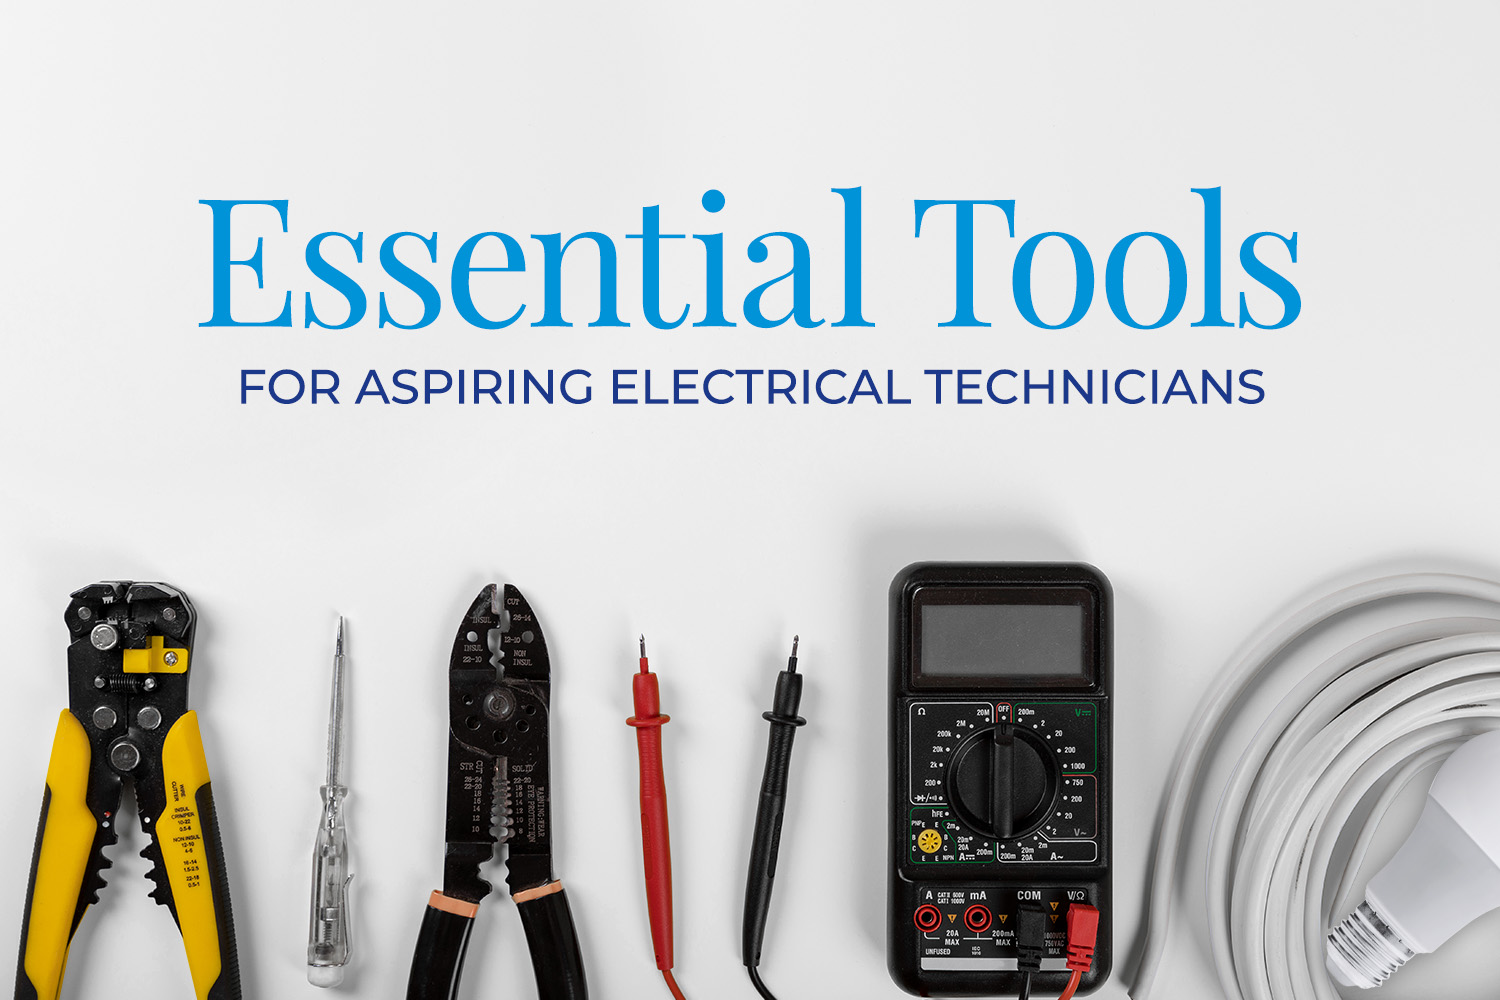 Essential tools for aspiring electrical technicians